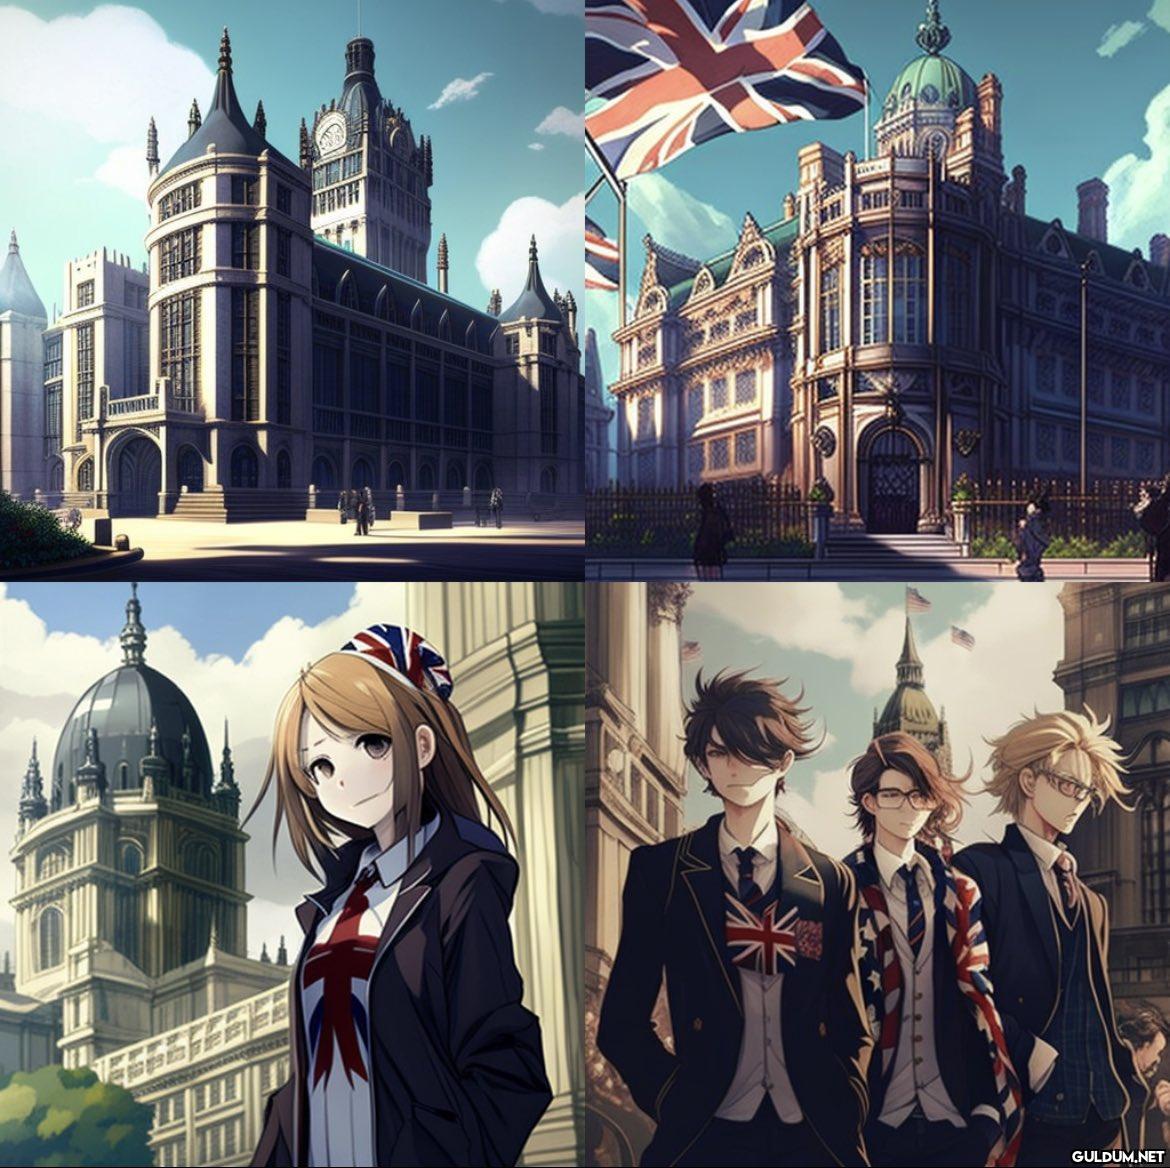 An anime about the UK...